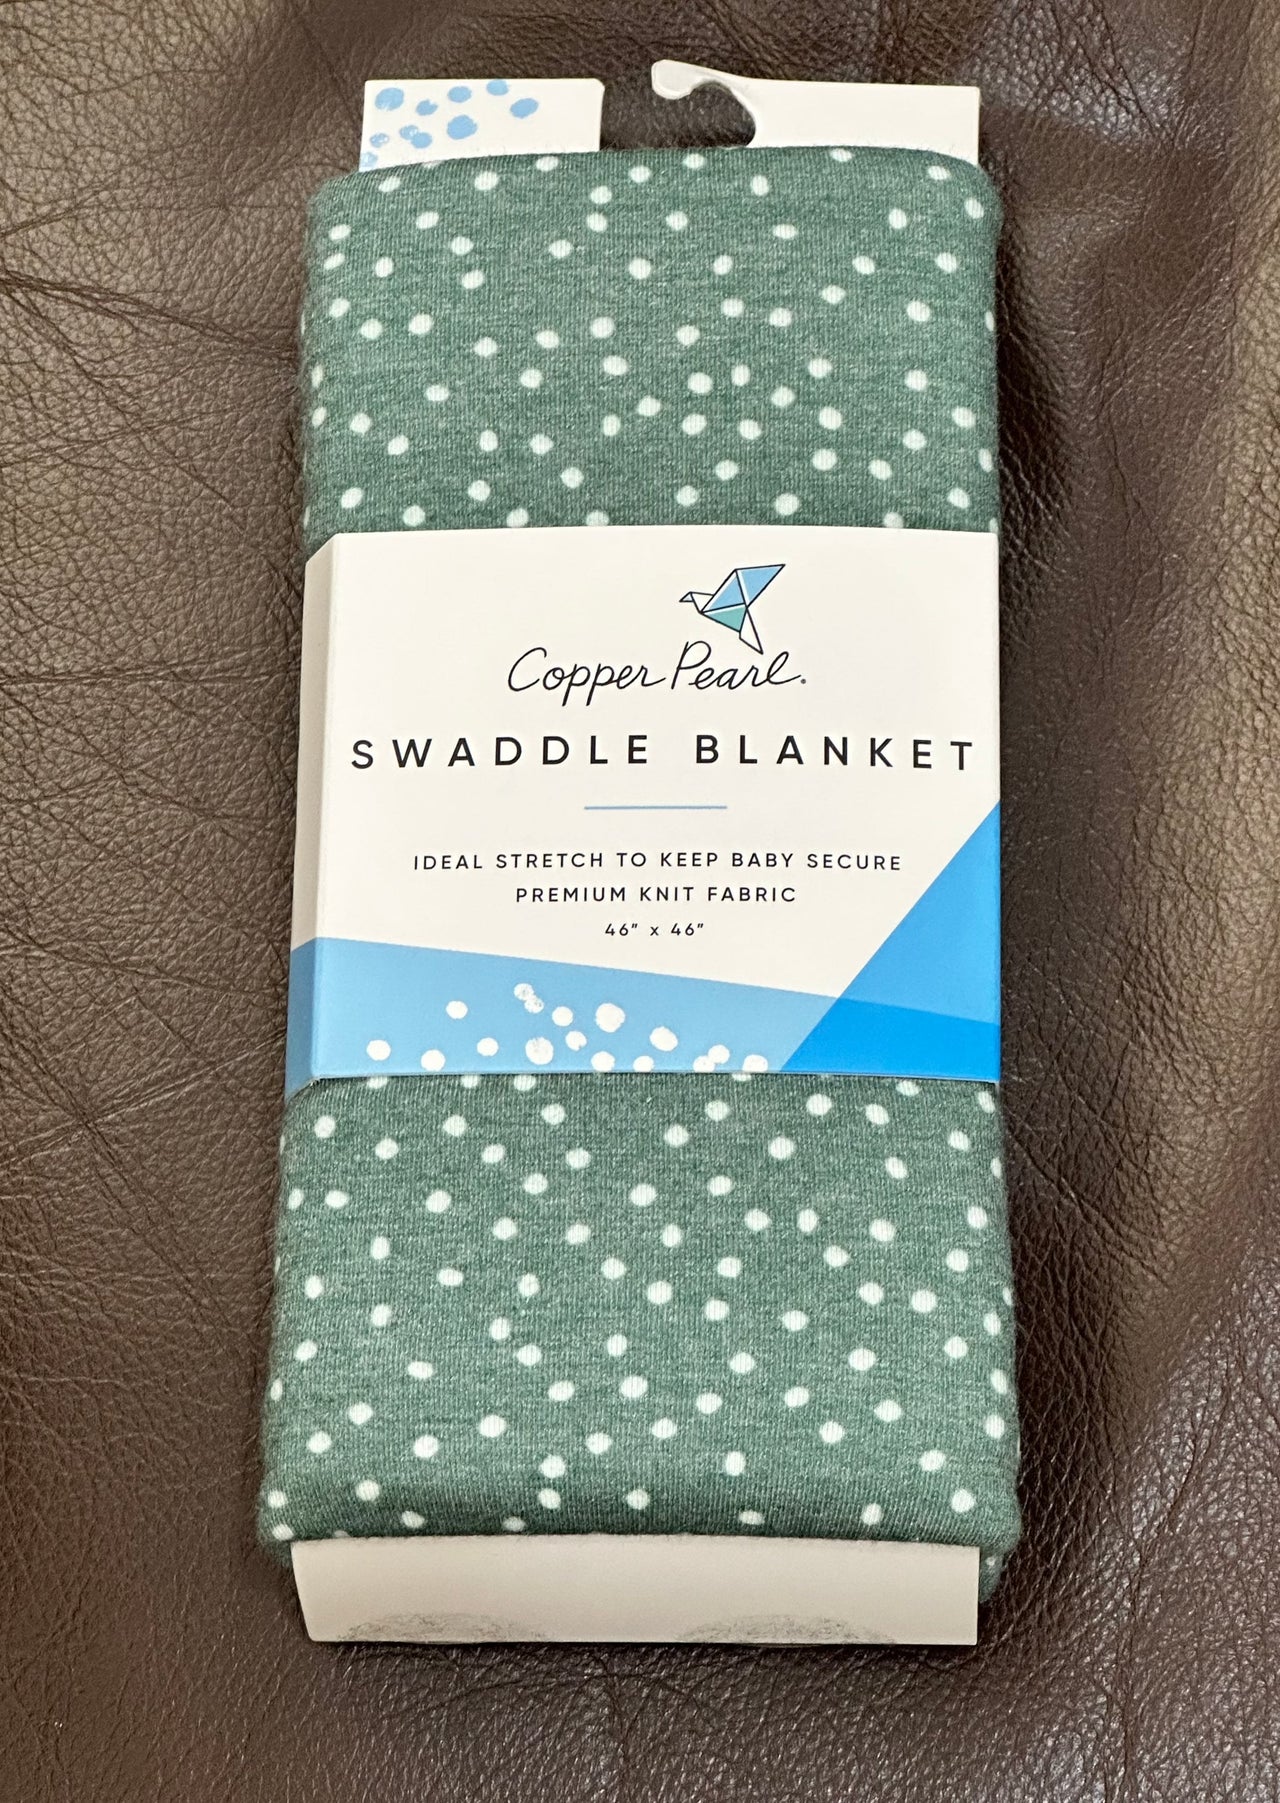 Knit Swaddle Blanket by Copper Pearl Carolina Baby aco Baby